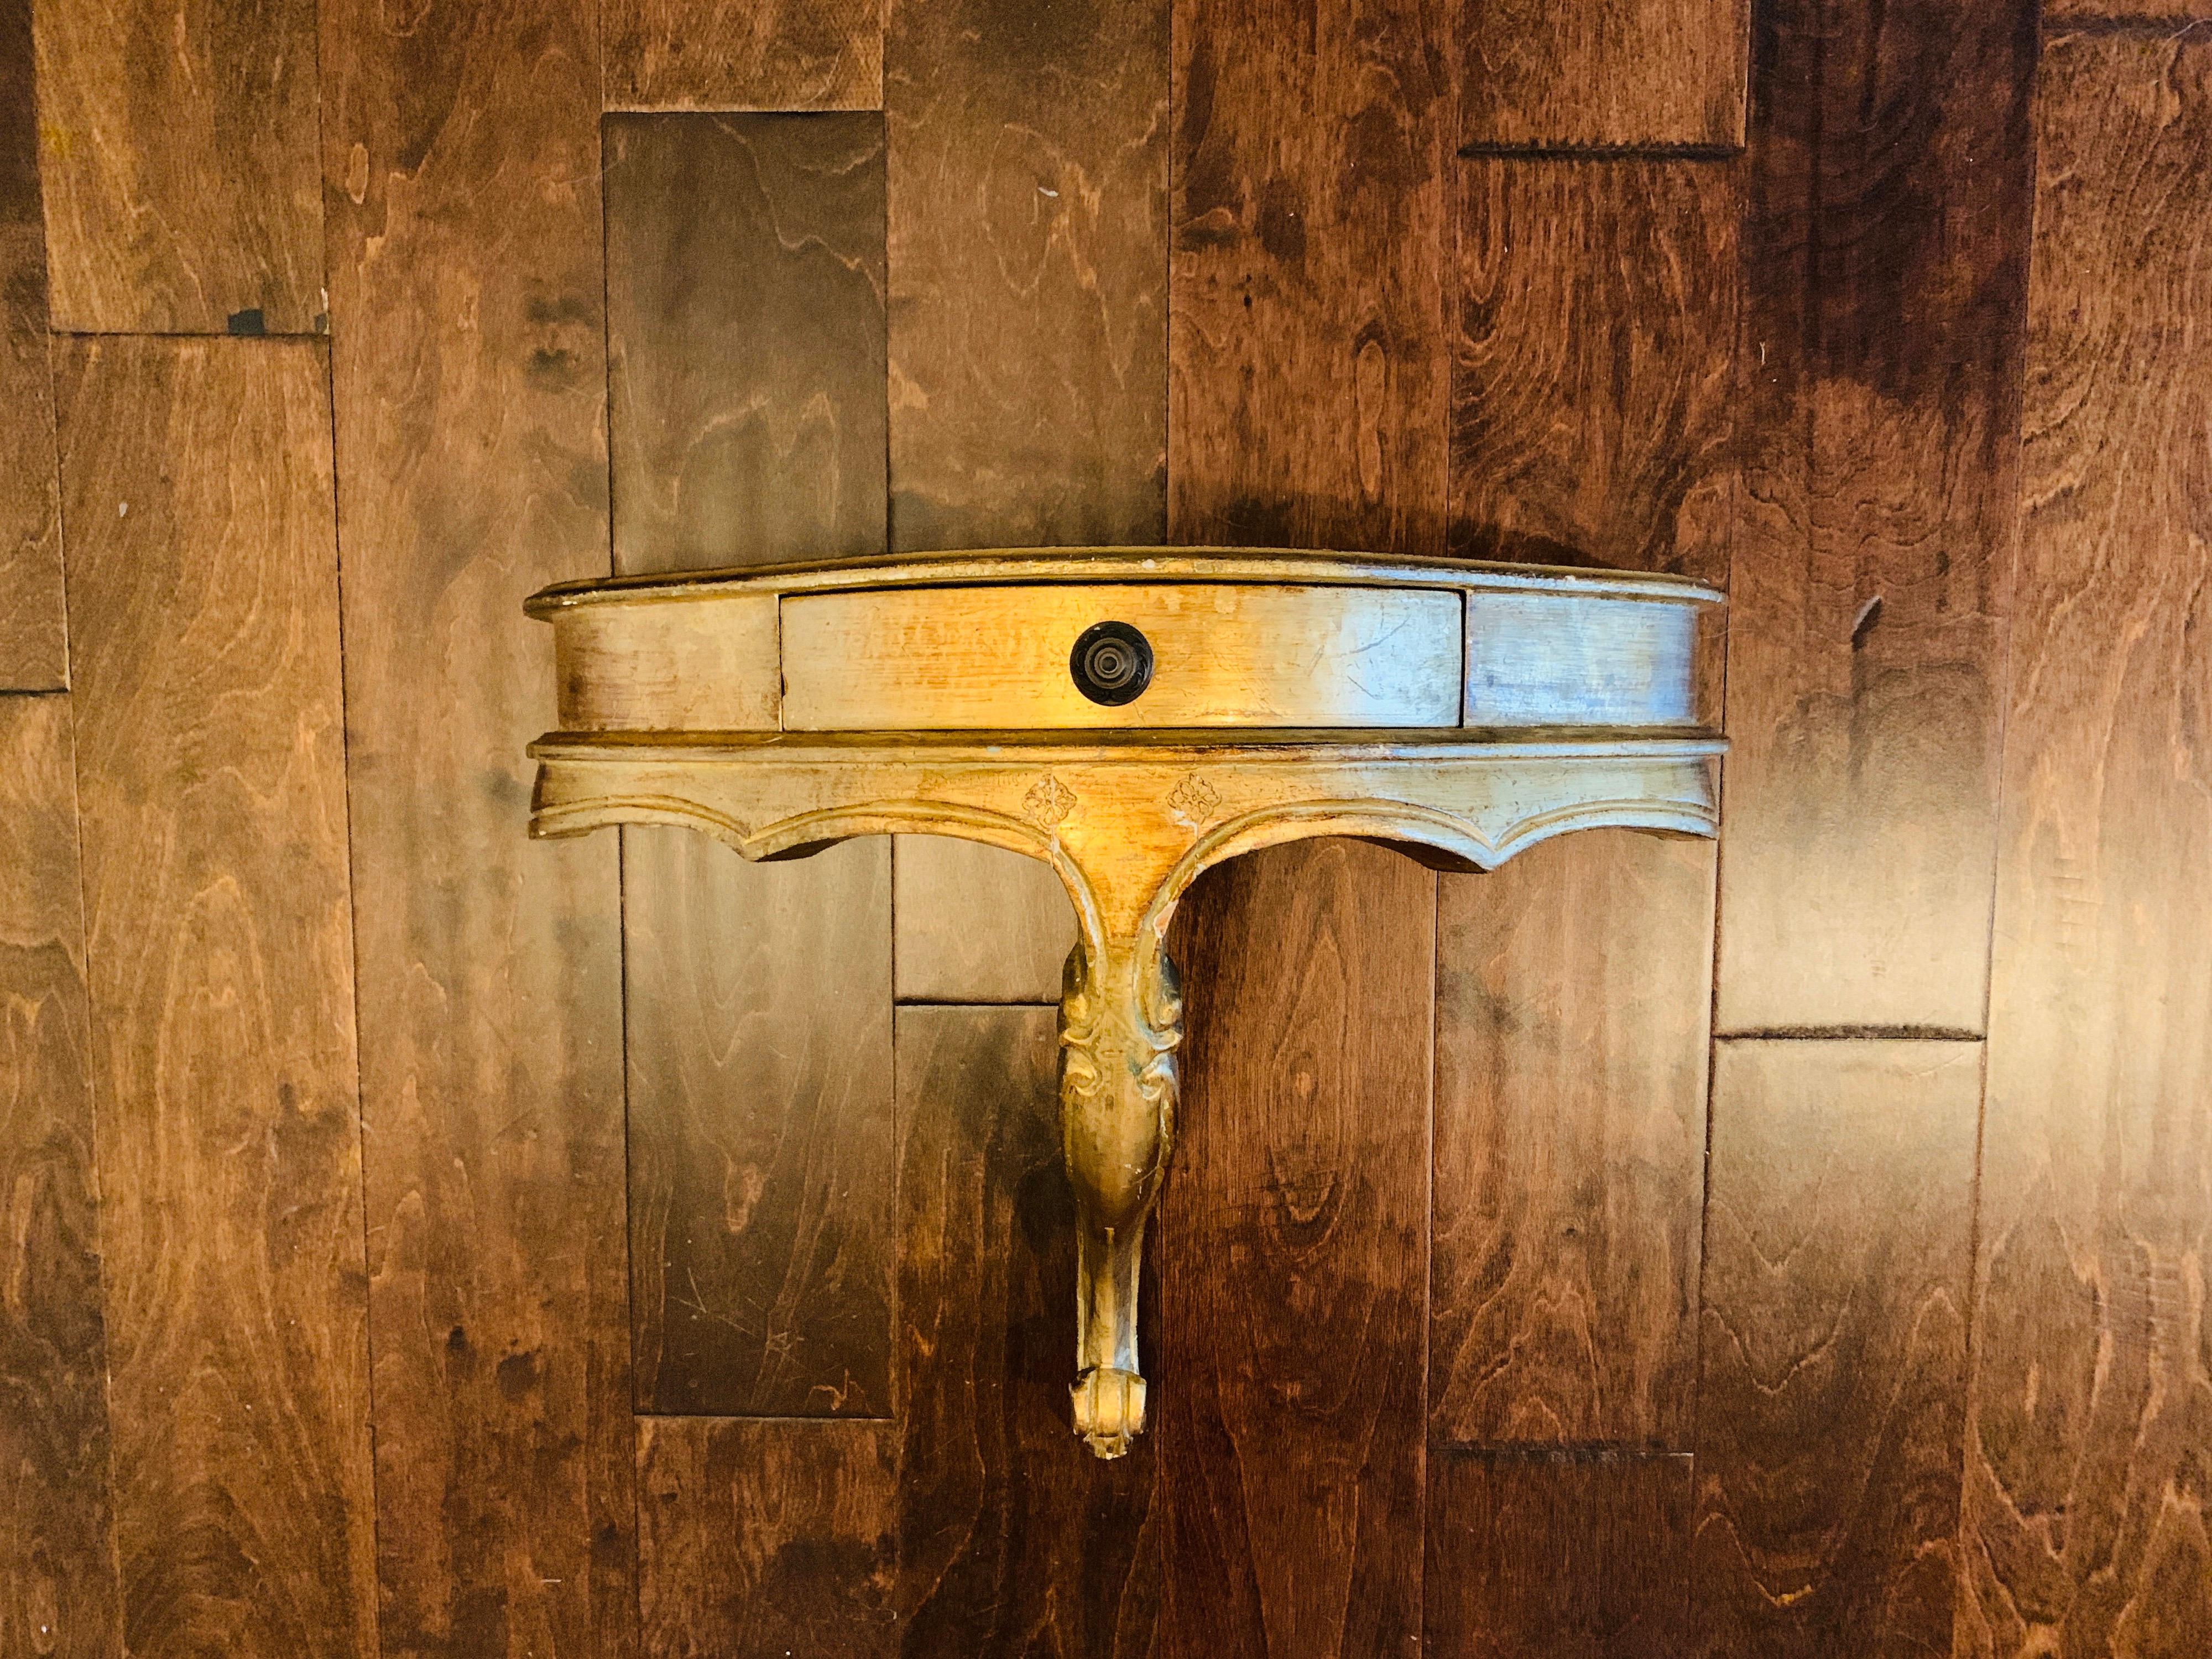 Listed is an absolutely stunning, 1950s Italian Florentine gilt wall hanging demilune shelf. This particular piece is very rare and unusual, as it looks like a standard, smaller Italian wall shelf bracket, though this is an oversized version --